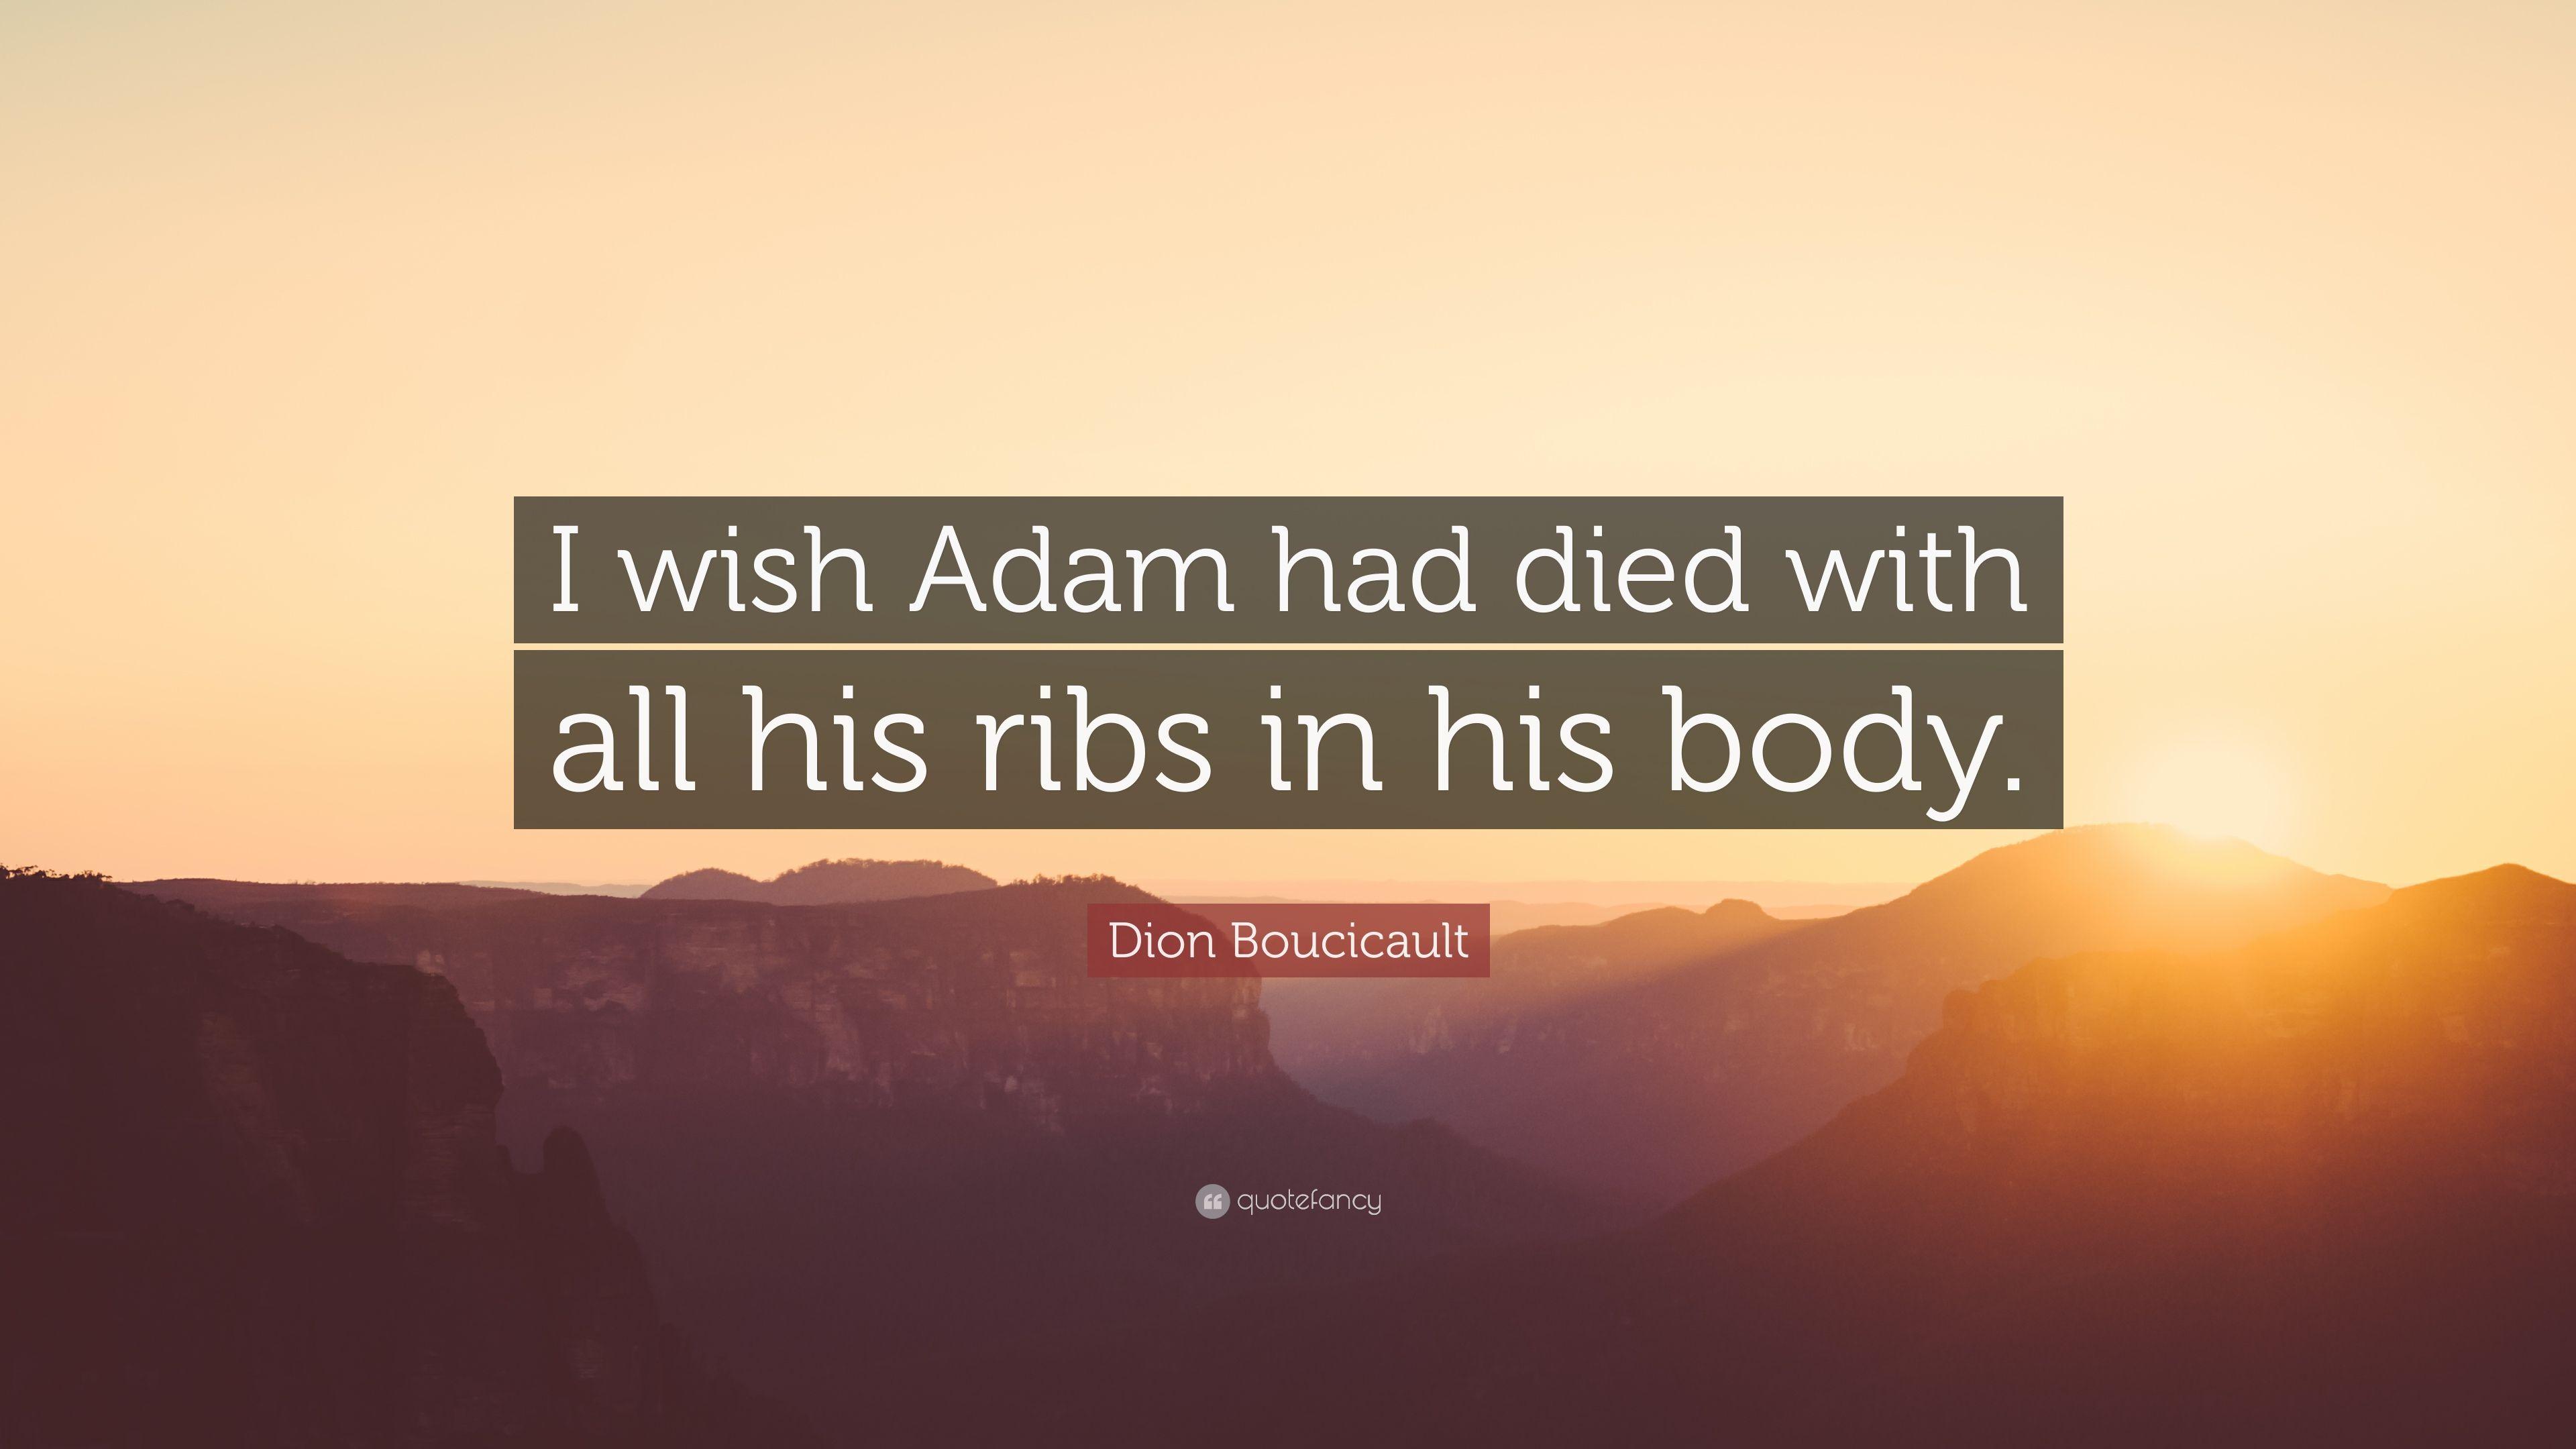 Dion Boucicault Quote: “I wish Adam had died with all his ribs